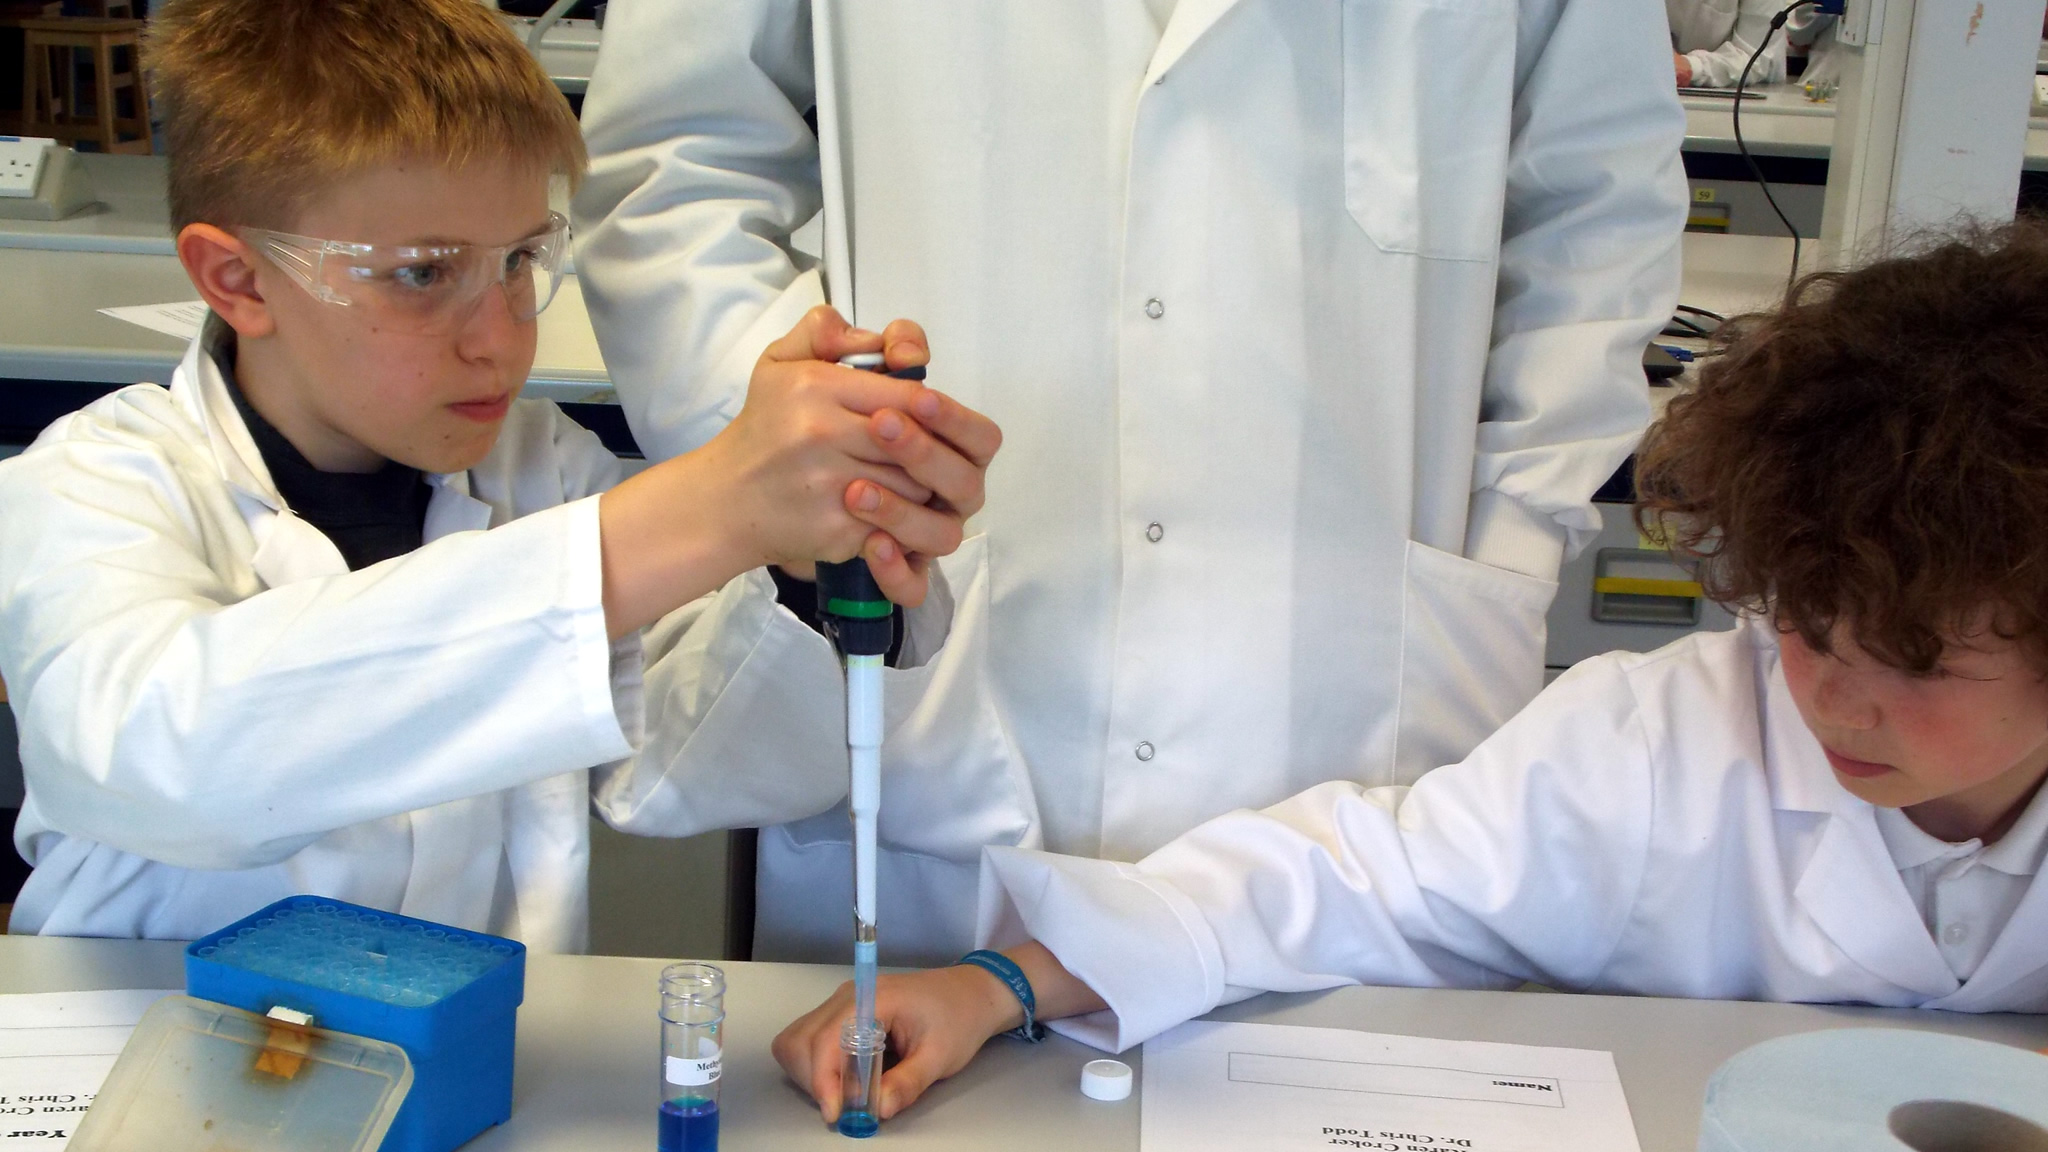 School students testing how light is absorbed by protein in solution